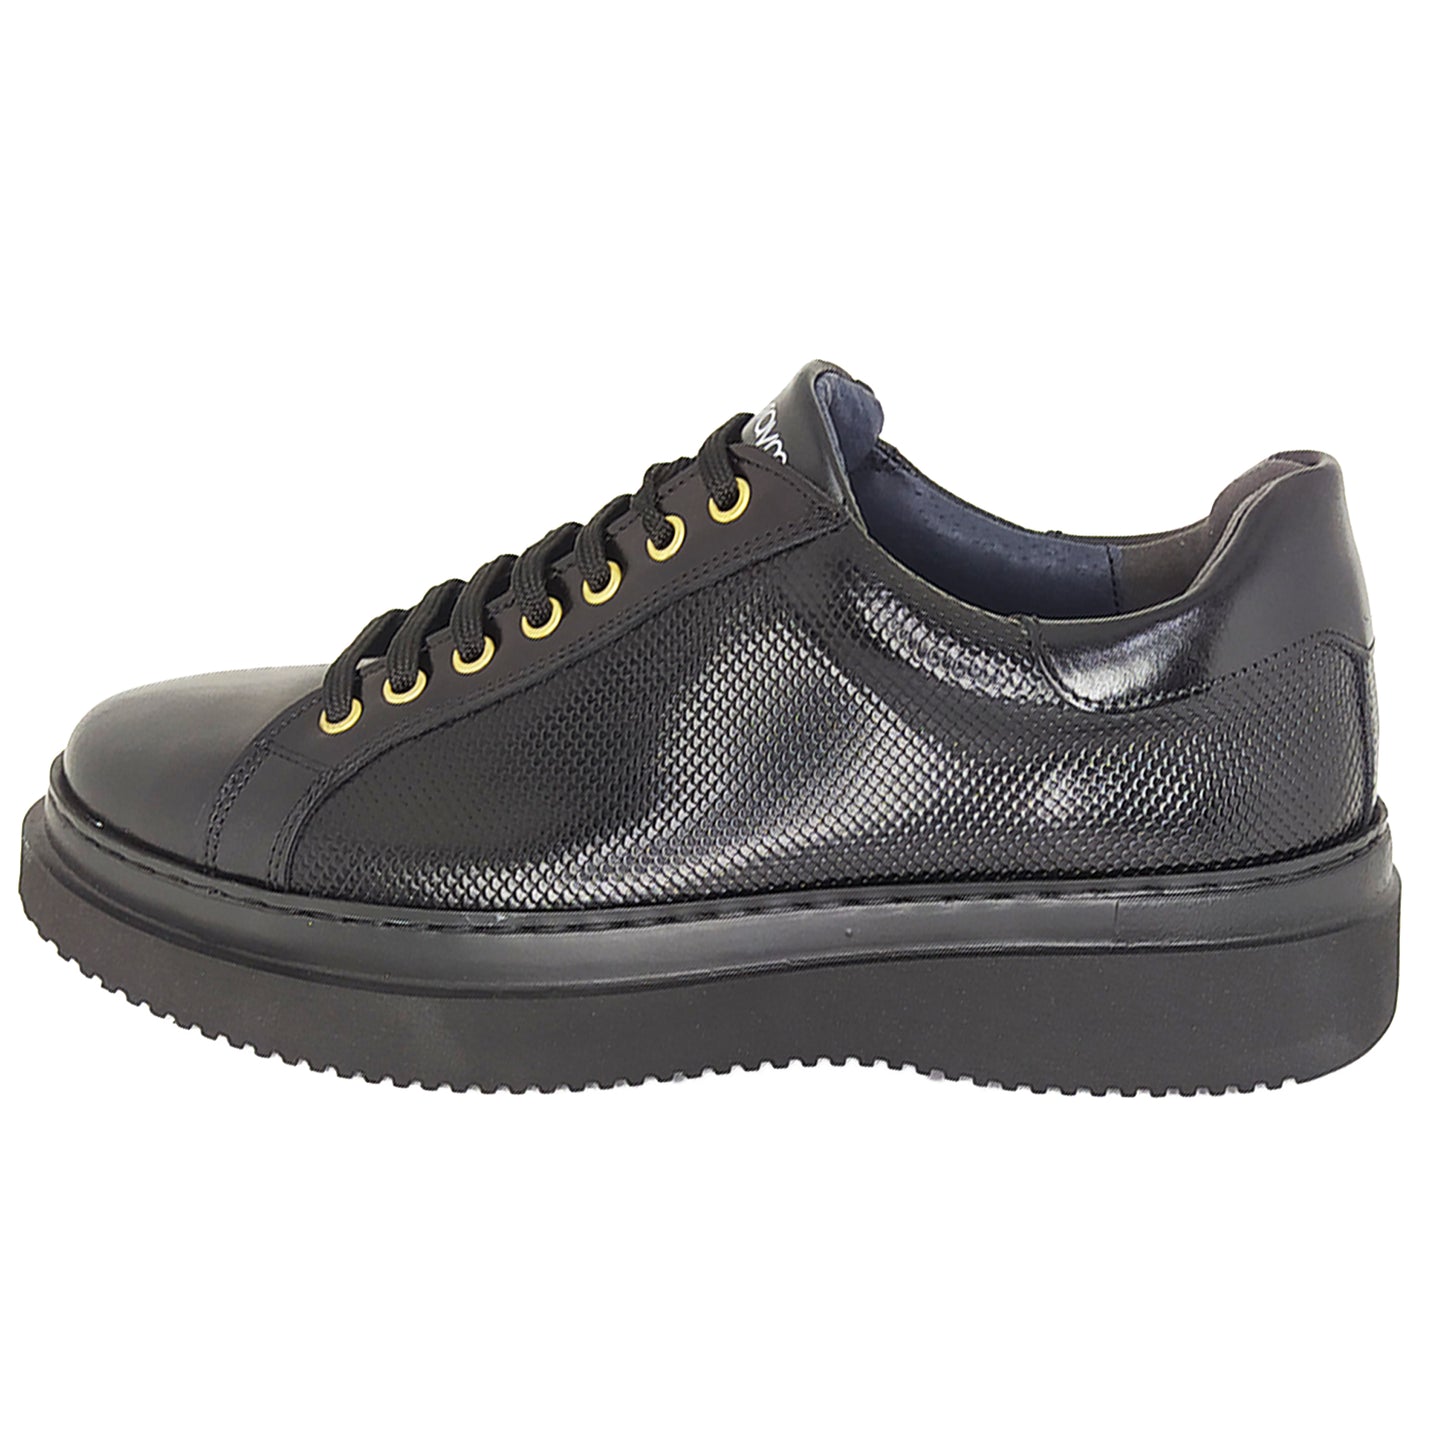 Handmade Leather Sneakers Shoes Black 823 BLACK YW